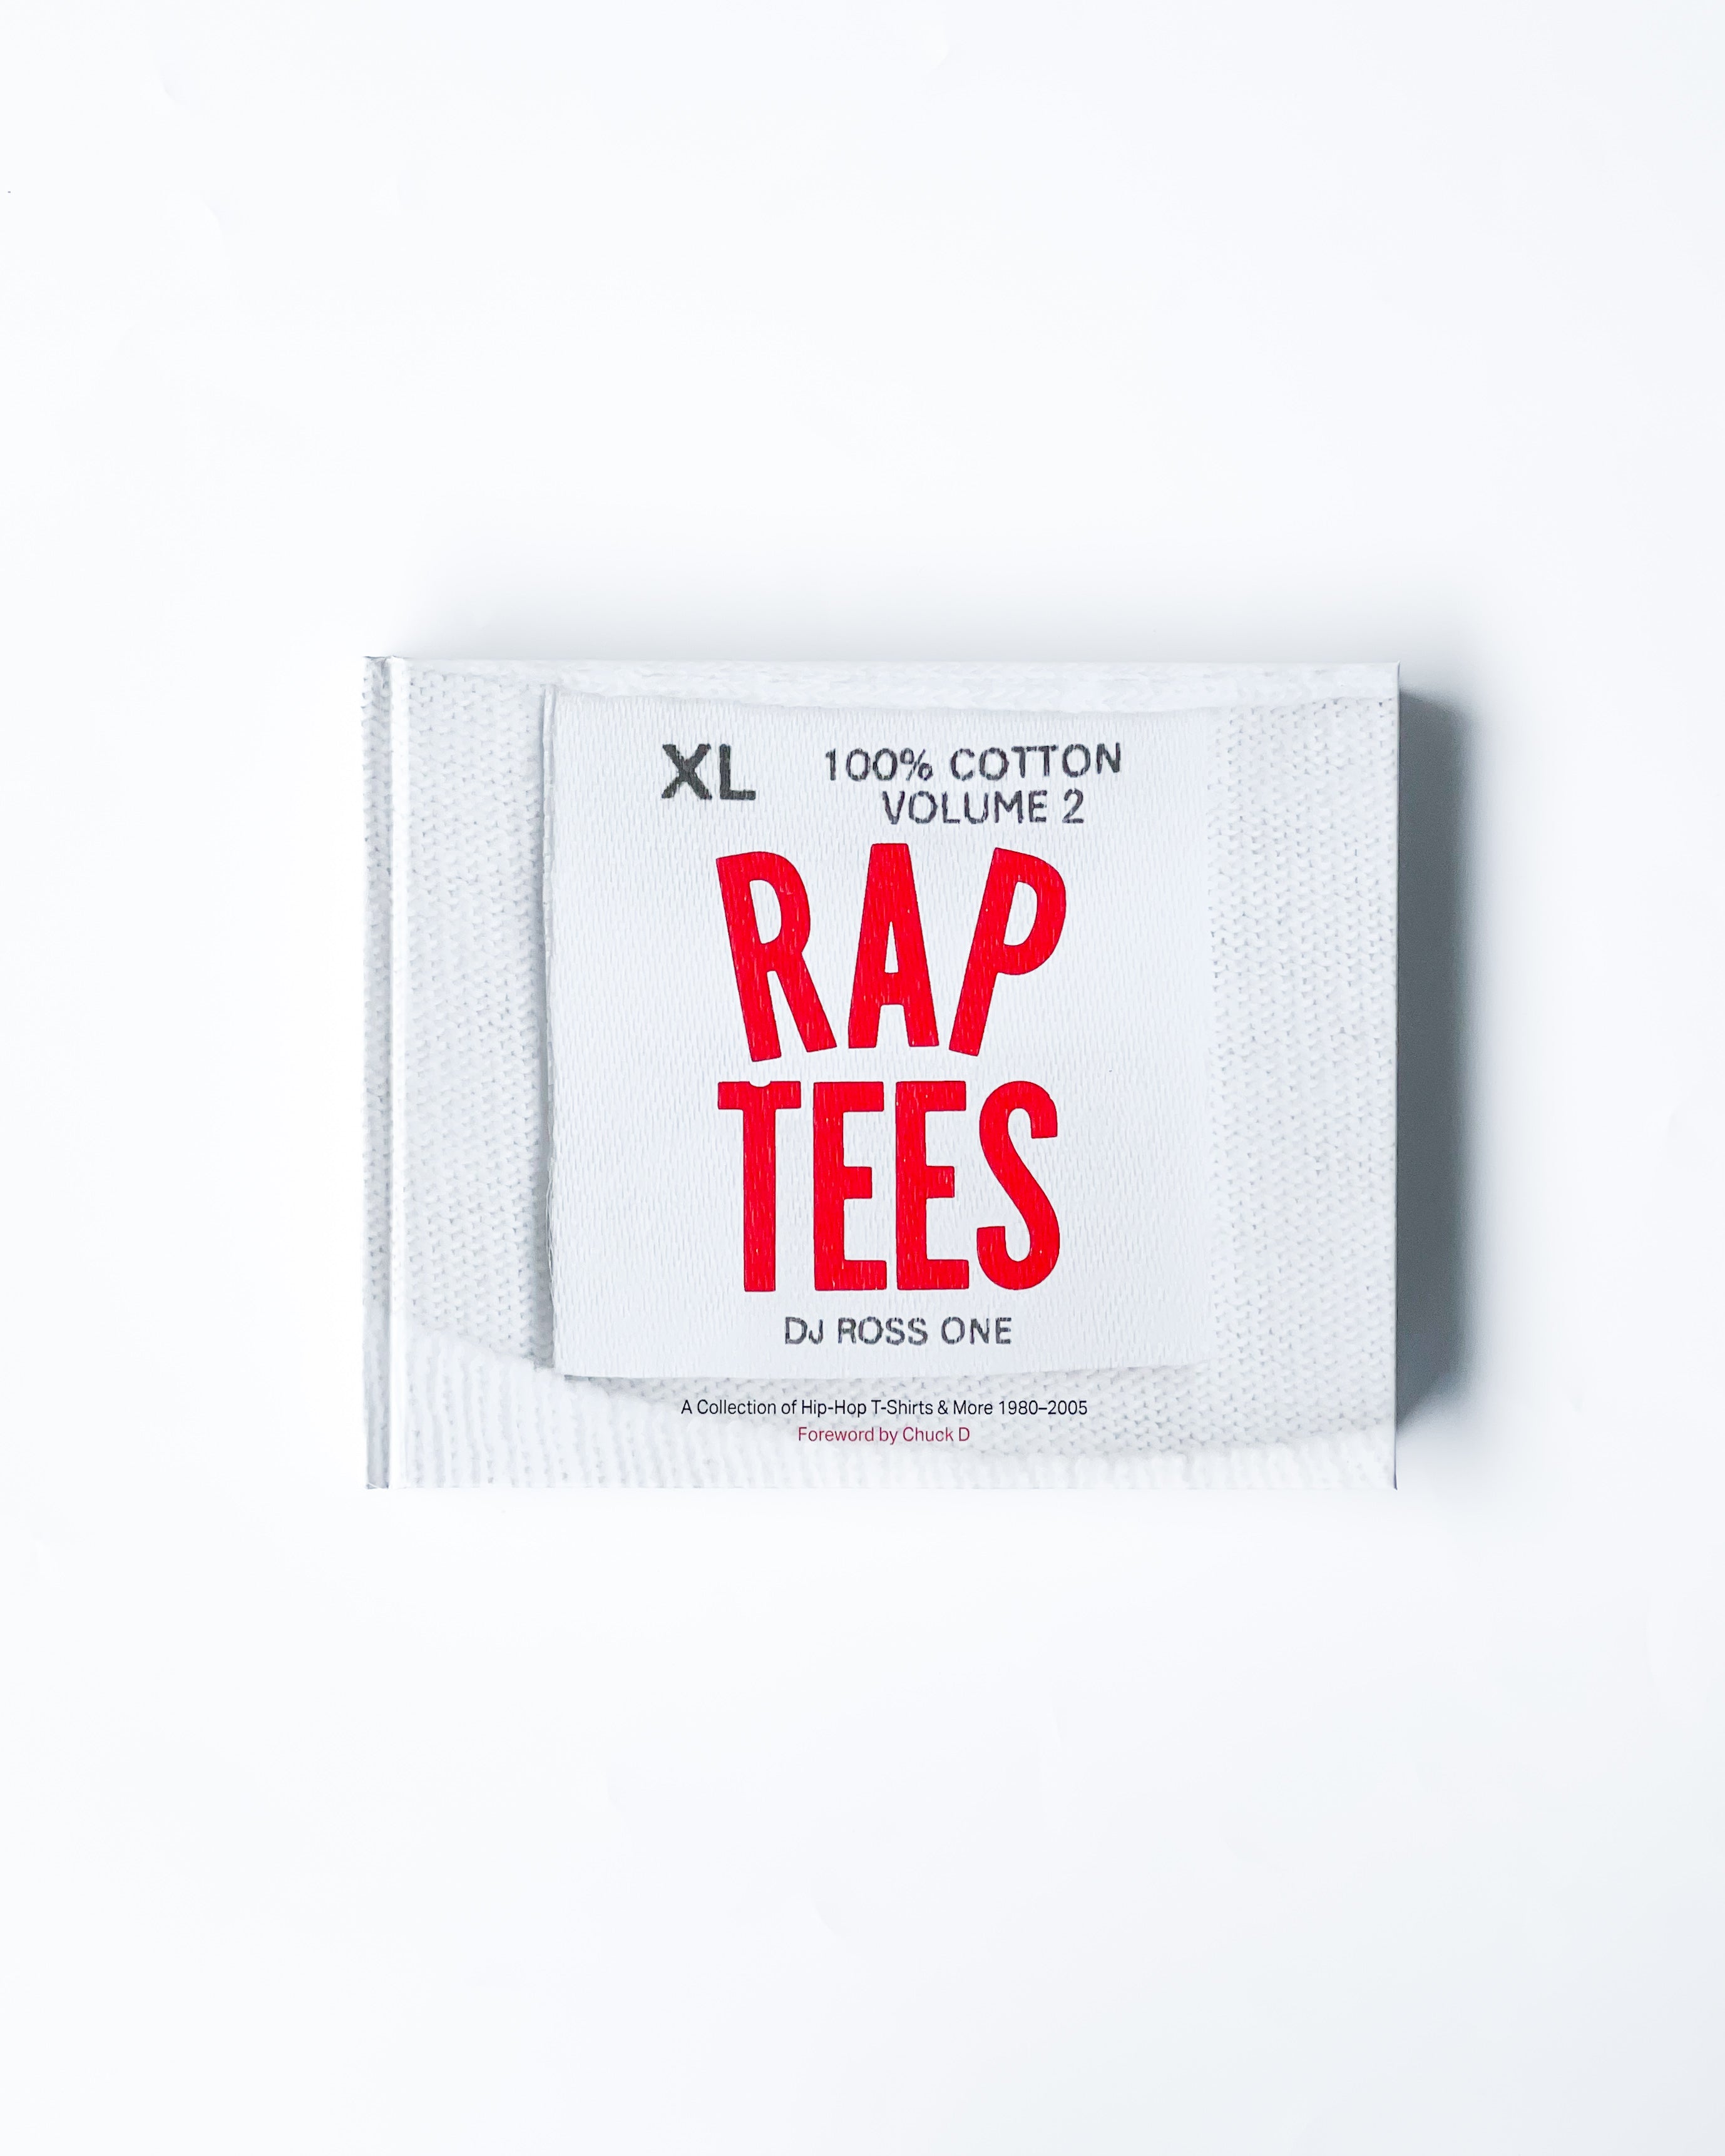 "RAP TEES" Volume 2 A Collection of Hip-Hop T-Shirts & More 1980-2005 / MULTI